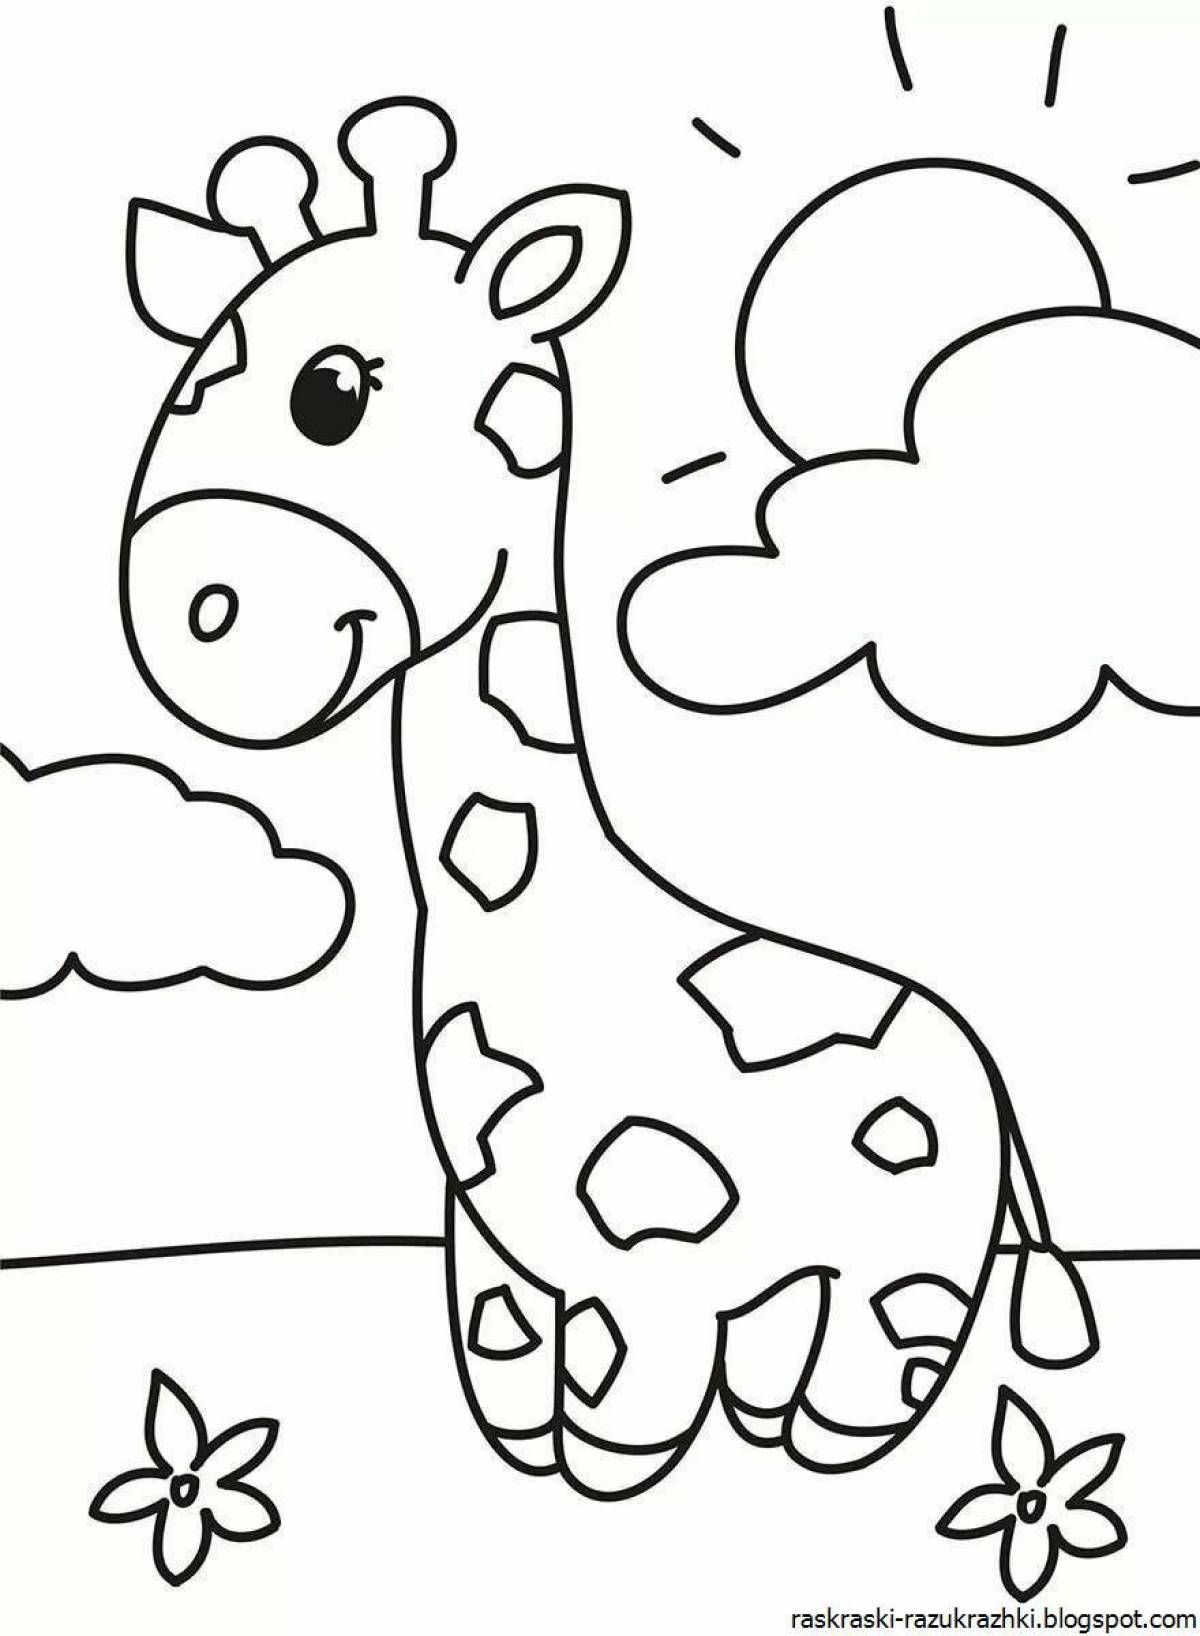 Colorful coloring book for 3-4 year olds